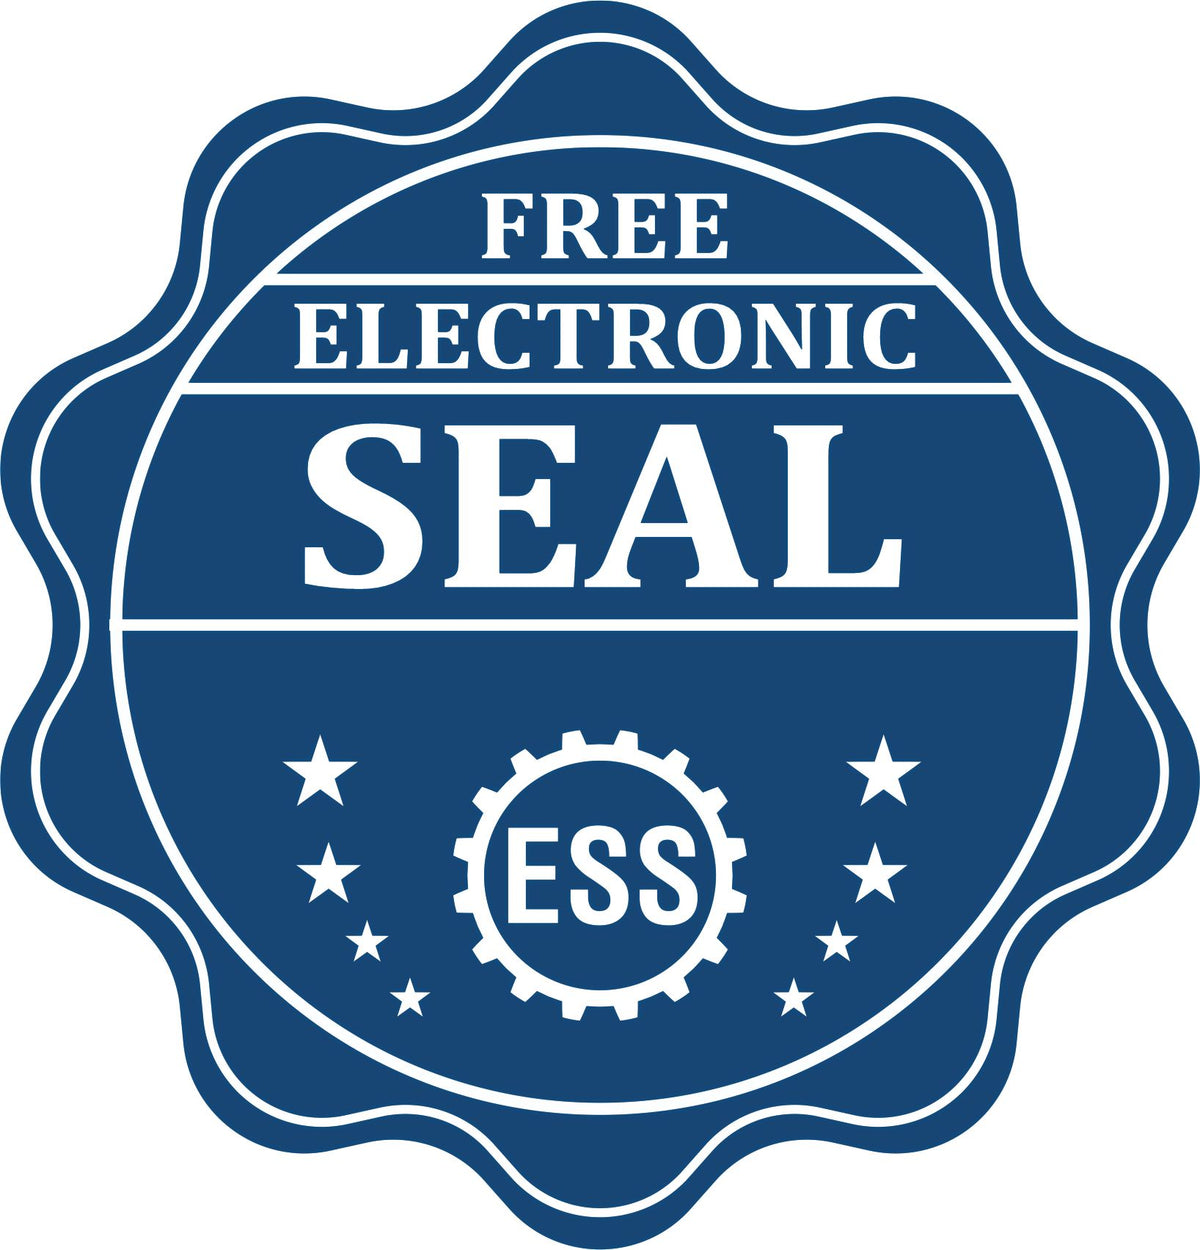 A badge showing a free electronic seal for the Slim Pre-Inked Connecticut Professional Engineer Seal Stamp with stars and the ESS gear on the emblem.